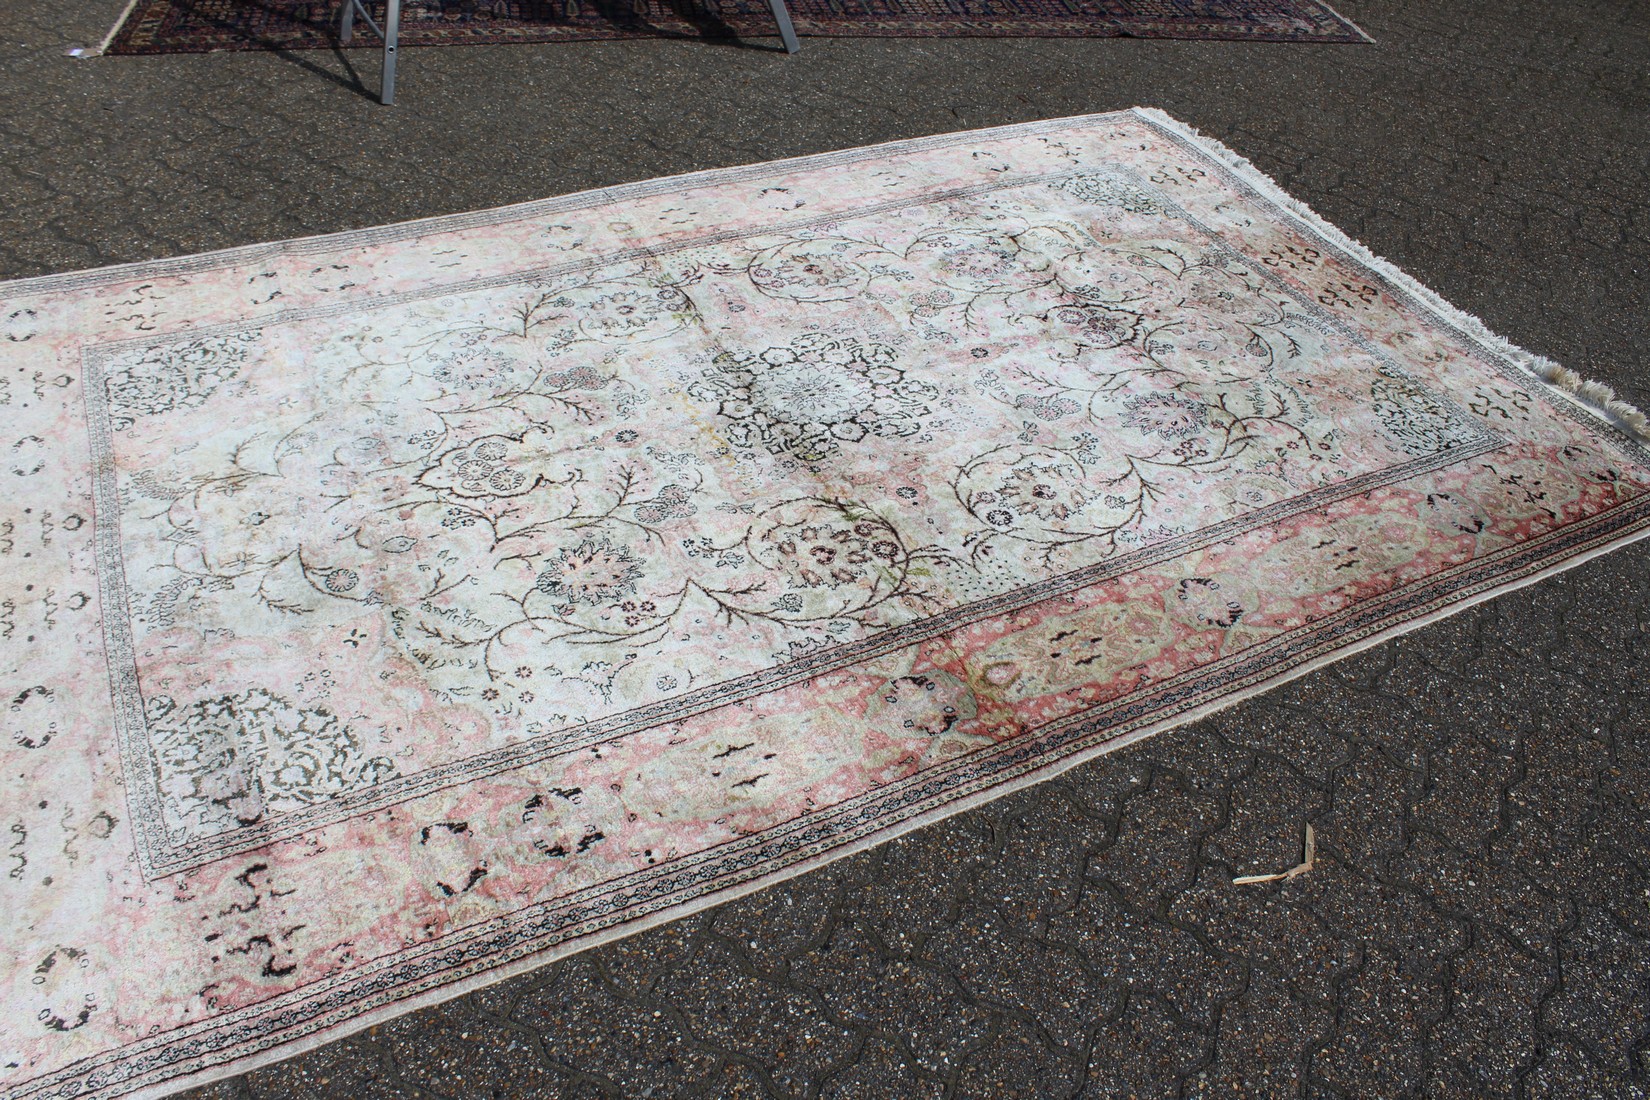 A MID 20TH CENTURY PERSIAN SILK KASHMIR CARPET, pale cream ground with typical floral decoration. - Image 2 of 3